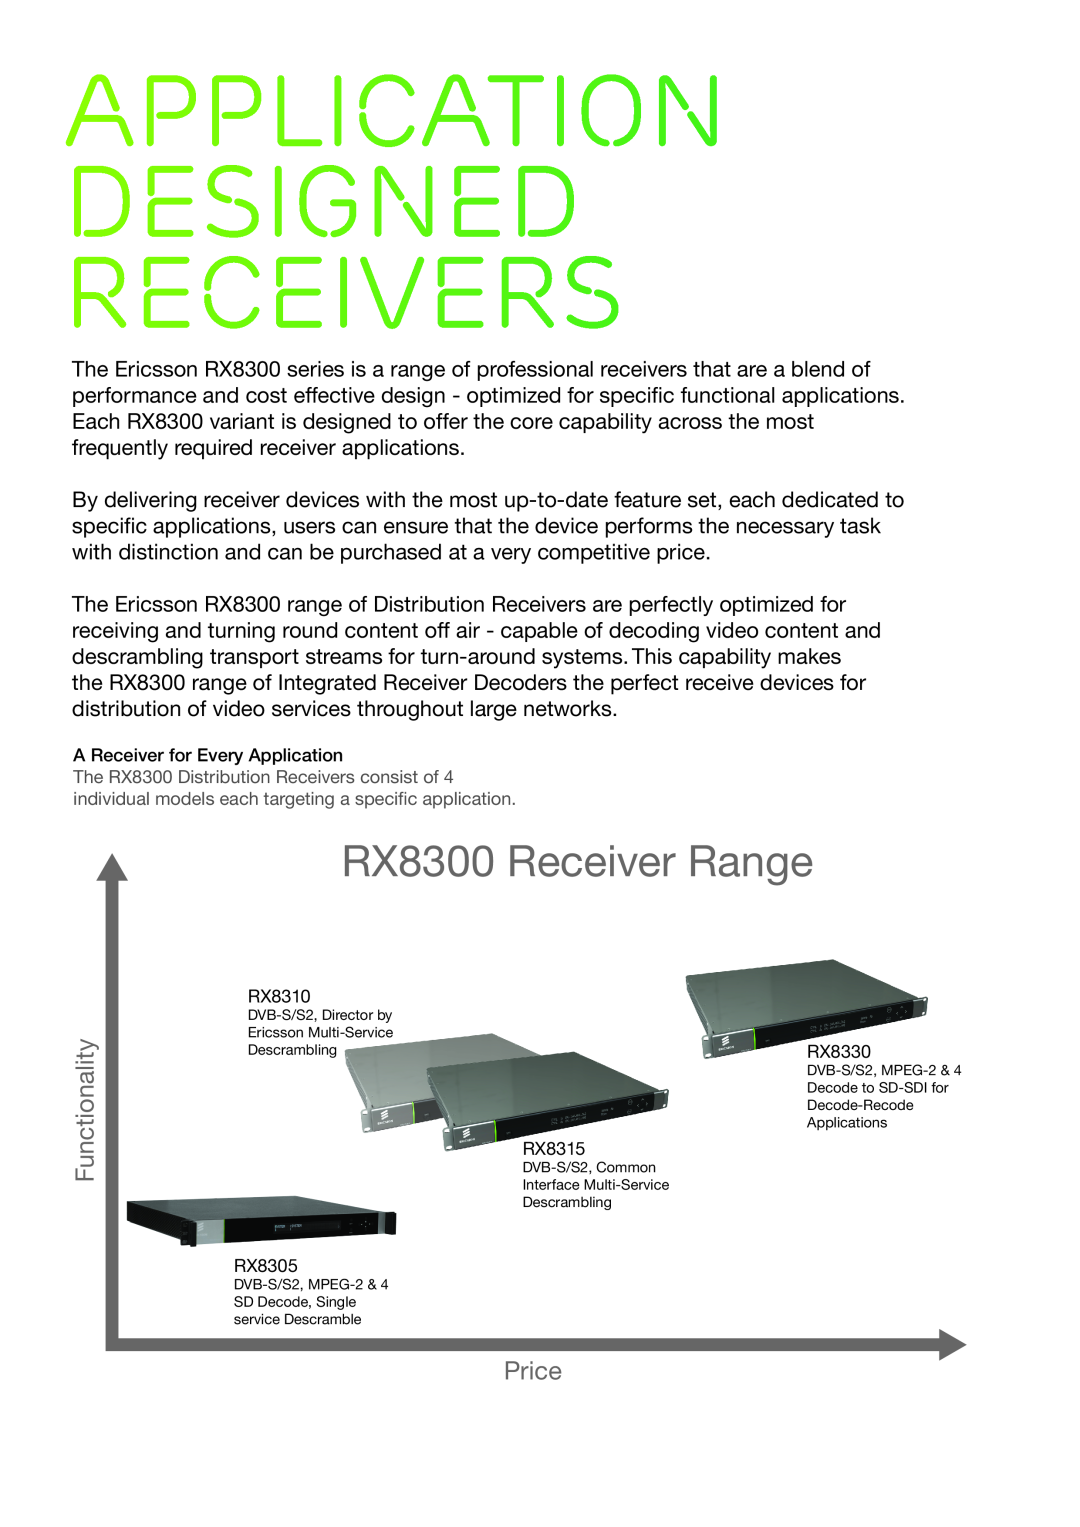 Ericsson manual Application Designed Receivers, RX8300 Receiver Range, Functionality, Price 